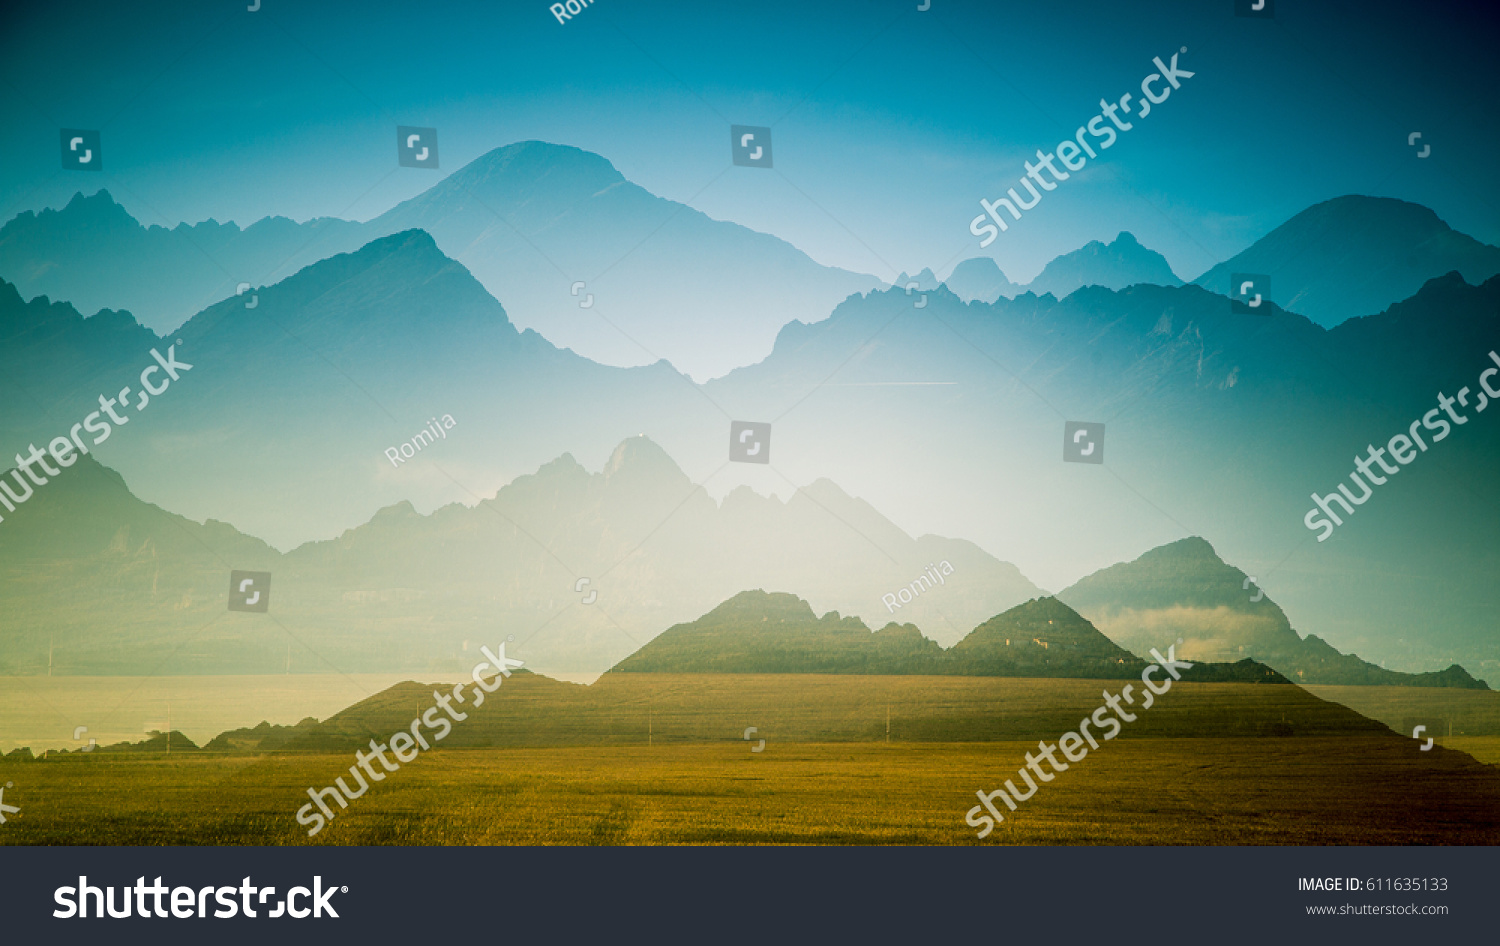 A beautiful, colorful, abstract mountain landscape with a hot summer haze in warm green tonality. Decorative, artistic double exposure. #611635133